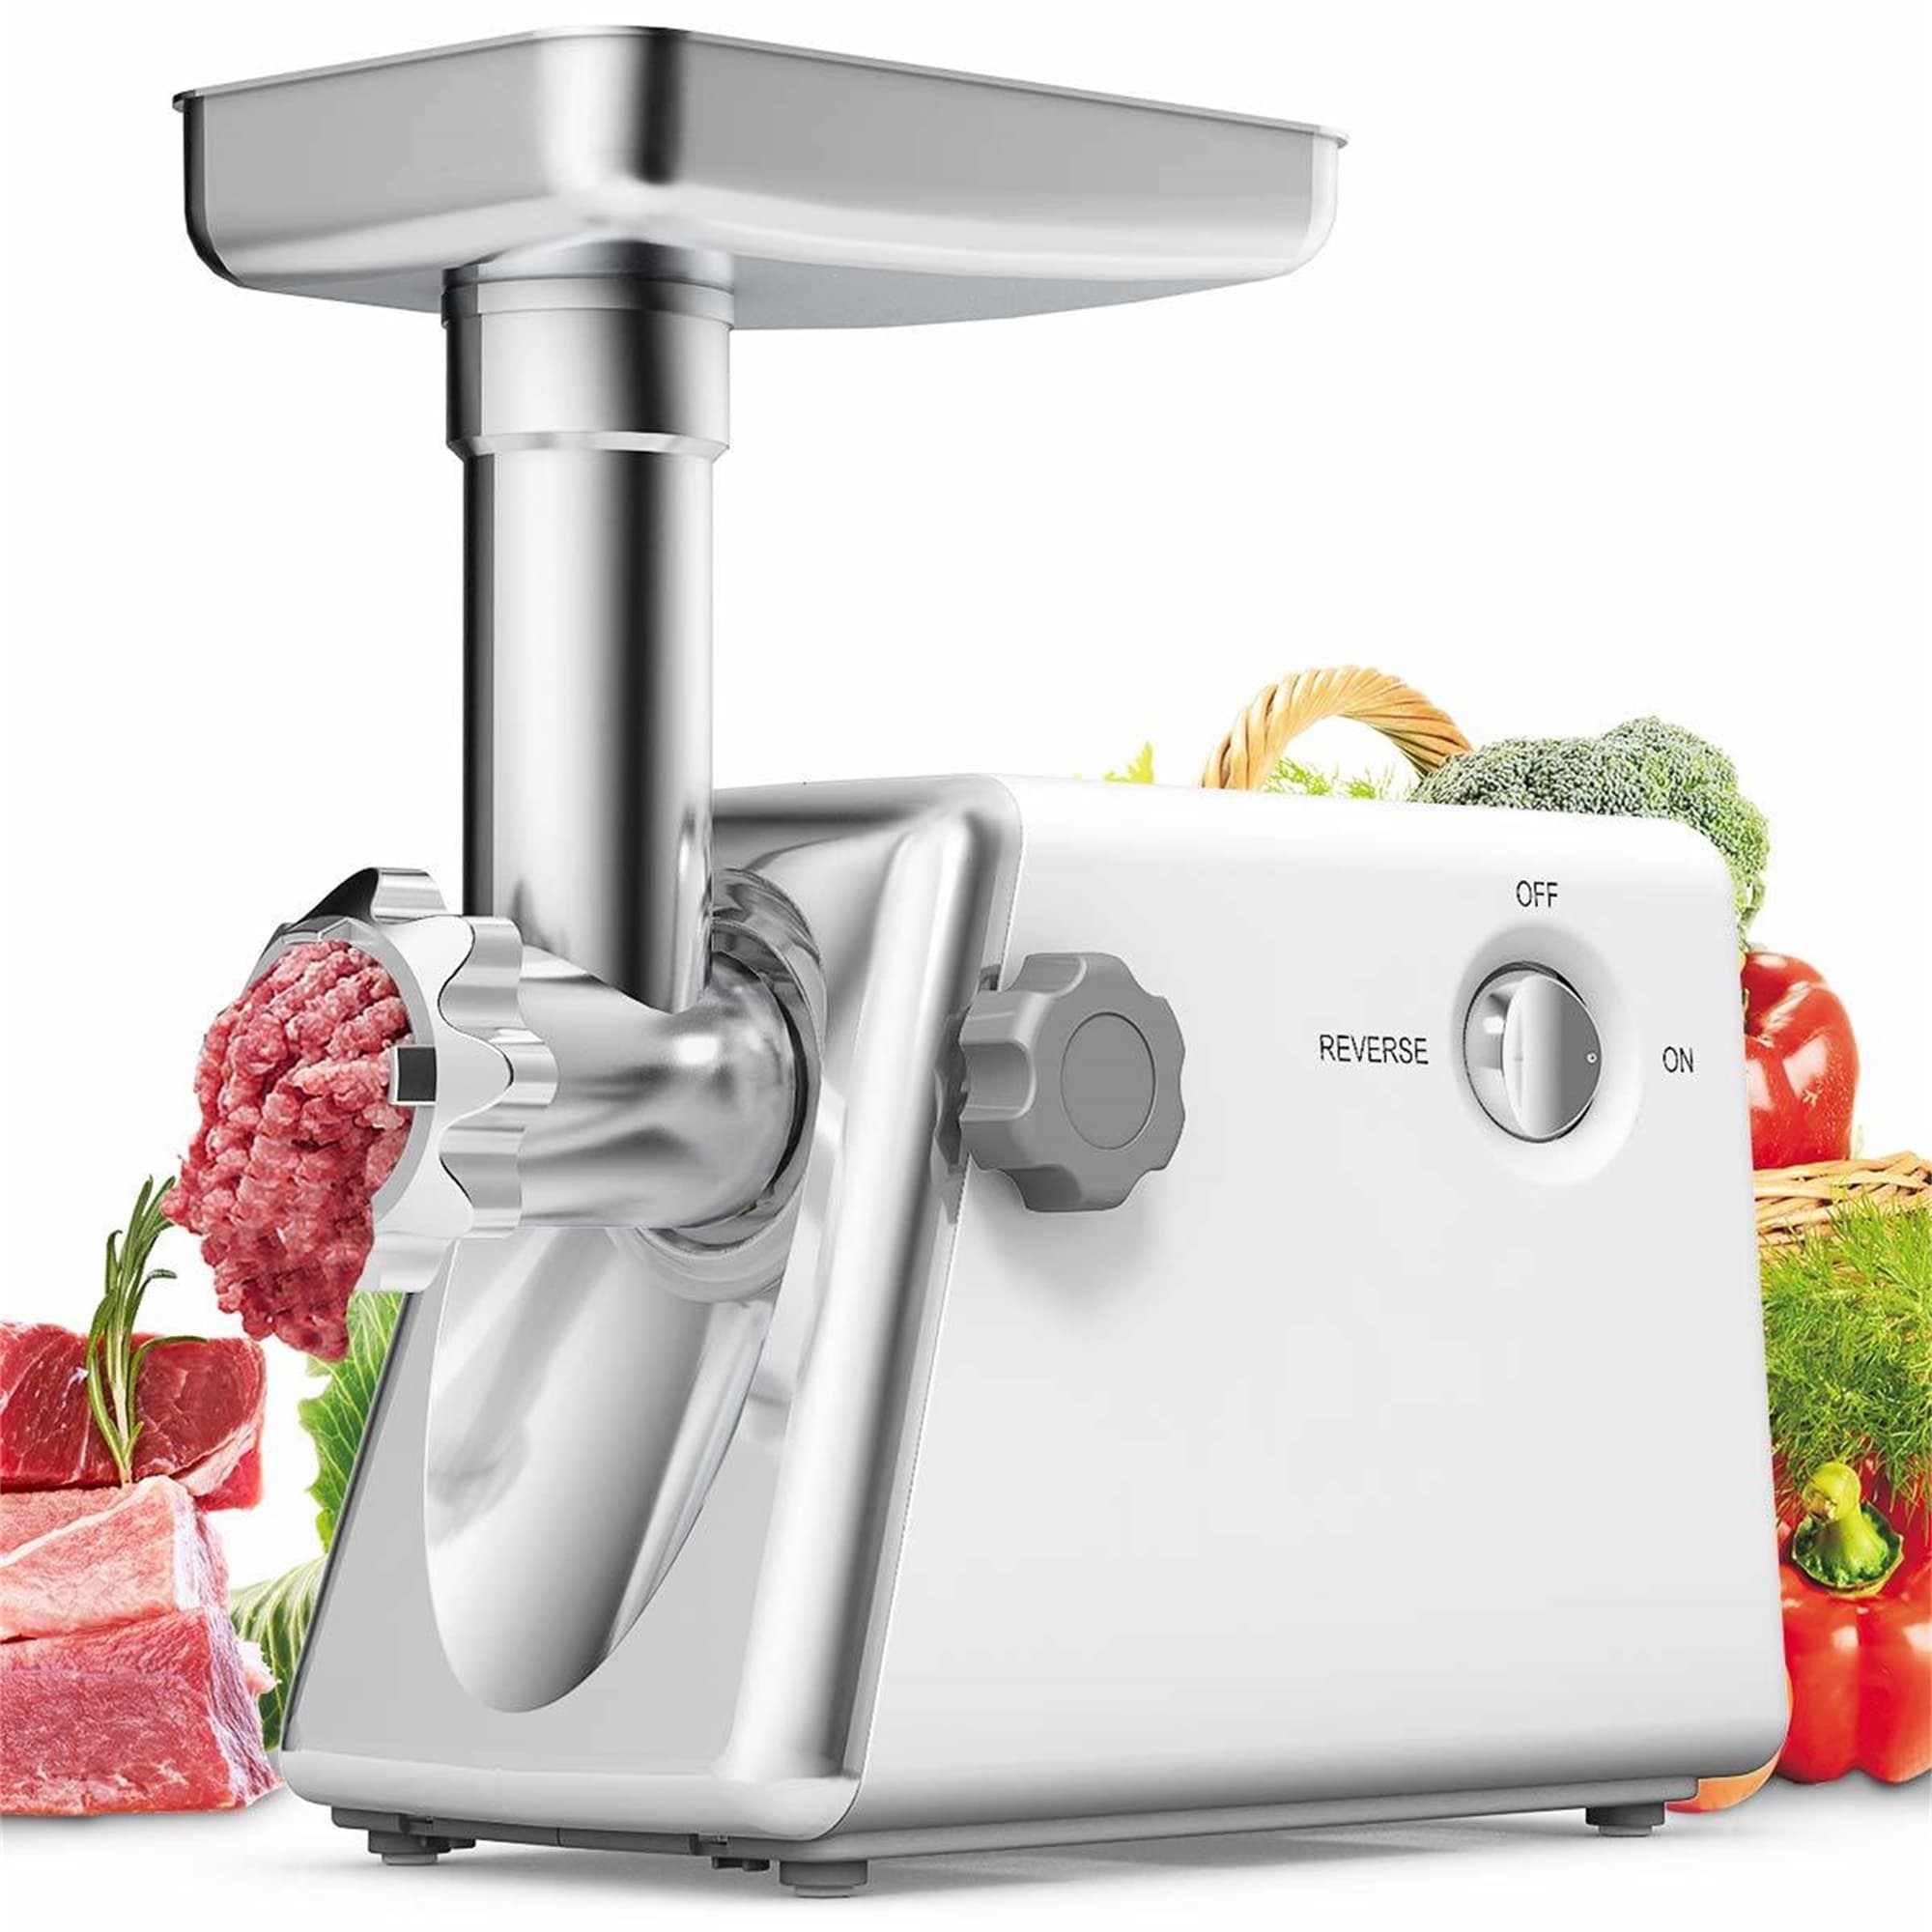 https://ak1.ostkcdn.com/images/products/is/images/direct/5824bd81453db621547475e9df0bd2705fbf099f/Stainless-Steel-Electric-Meat-Grinder%2C-Sausage-Stuffer-Kit-for-Home.jpg